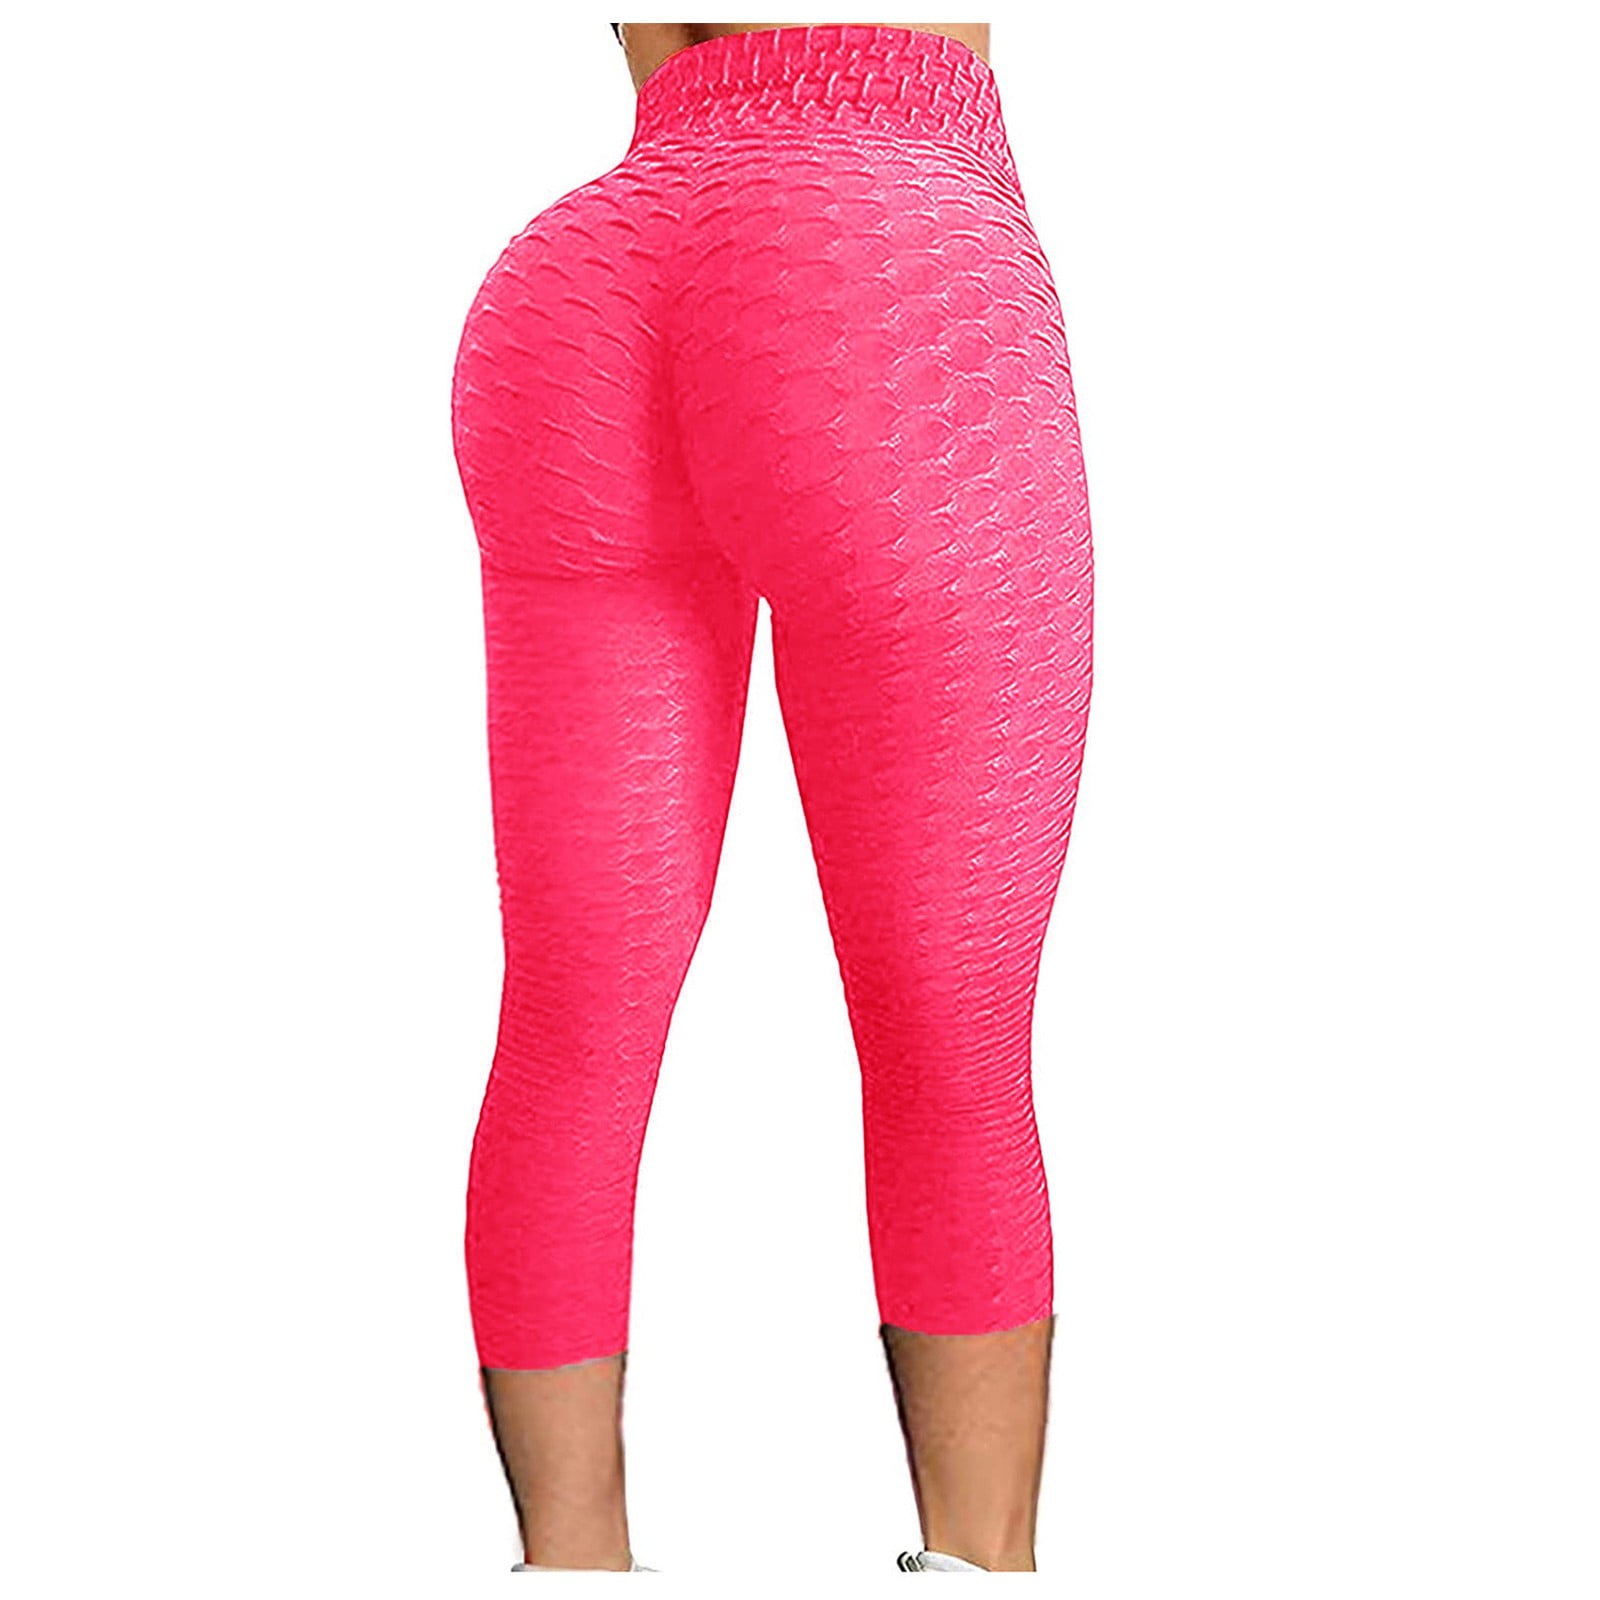 JWZUY Women's High Waist Solid Color Hip Lifting Exercise Fitness